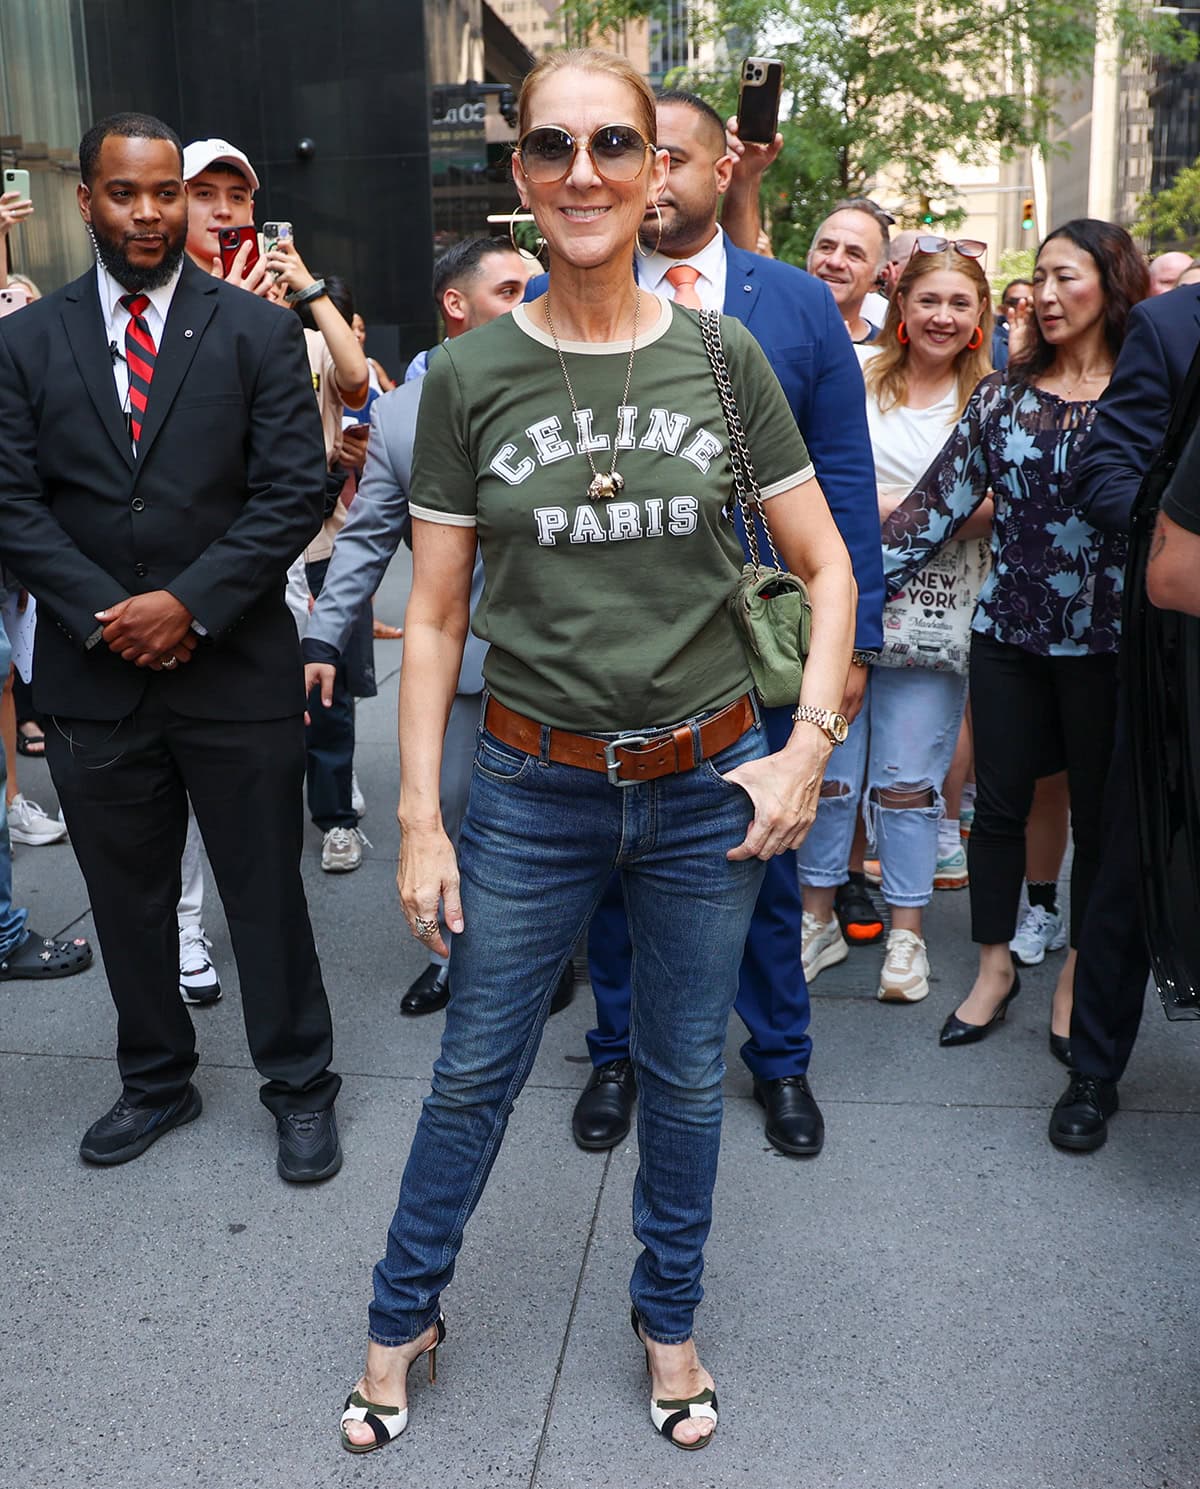 Celine Dion steps out in New York City in a retro-style casual ensemble composed of a green Celine '70s-style logo tee and belted skinny jeans